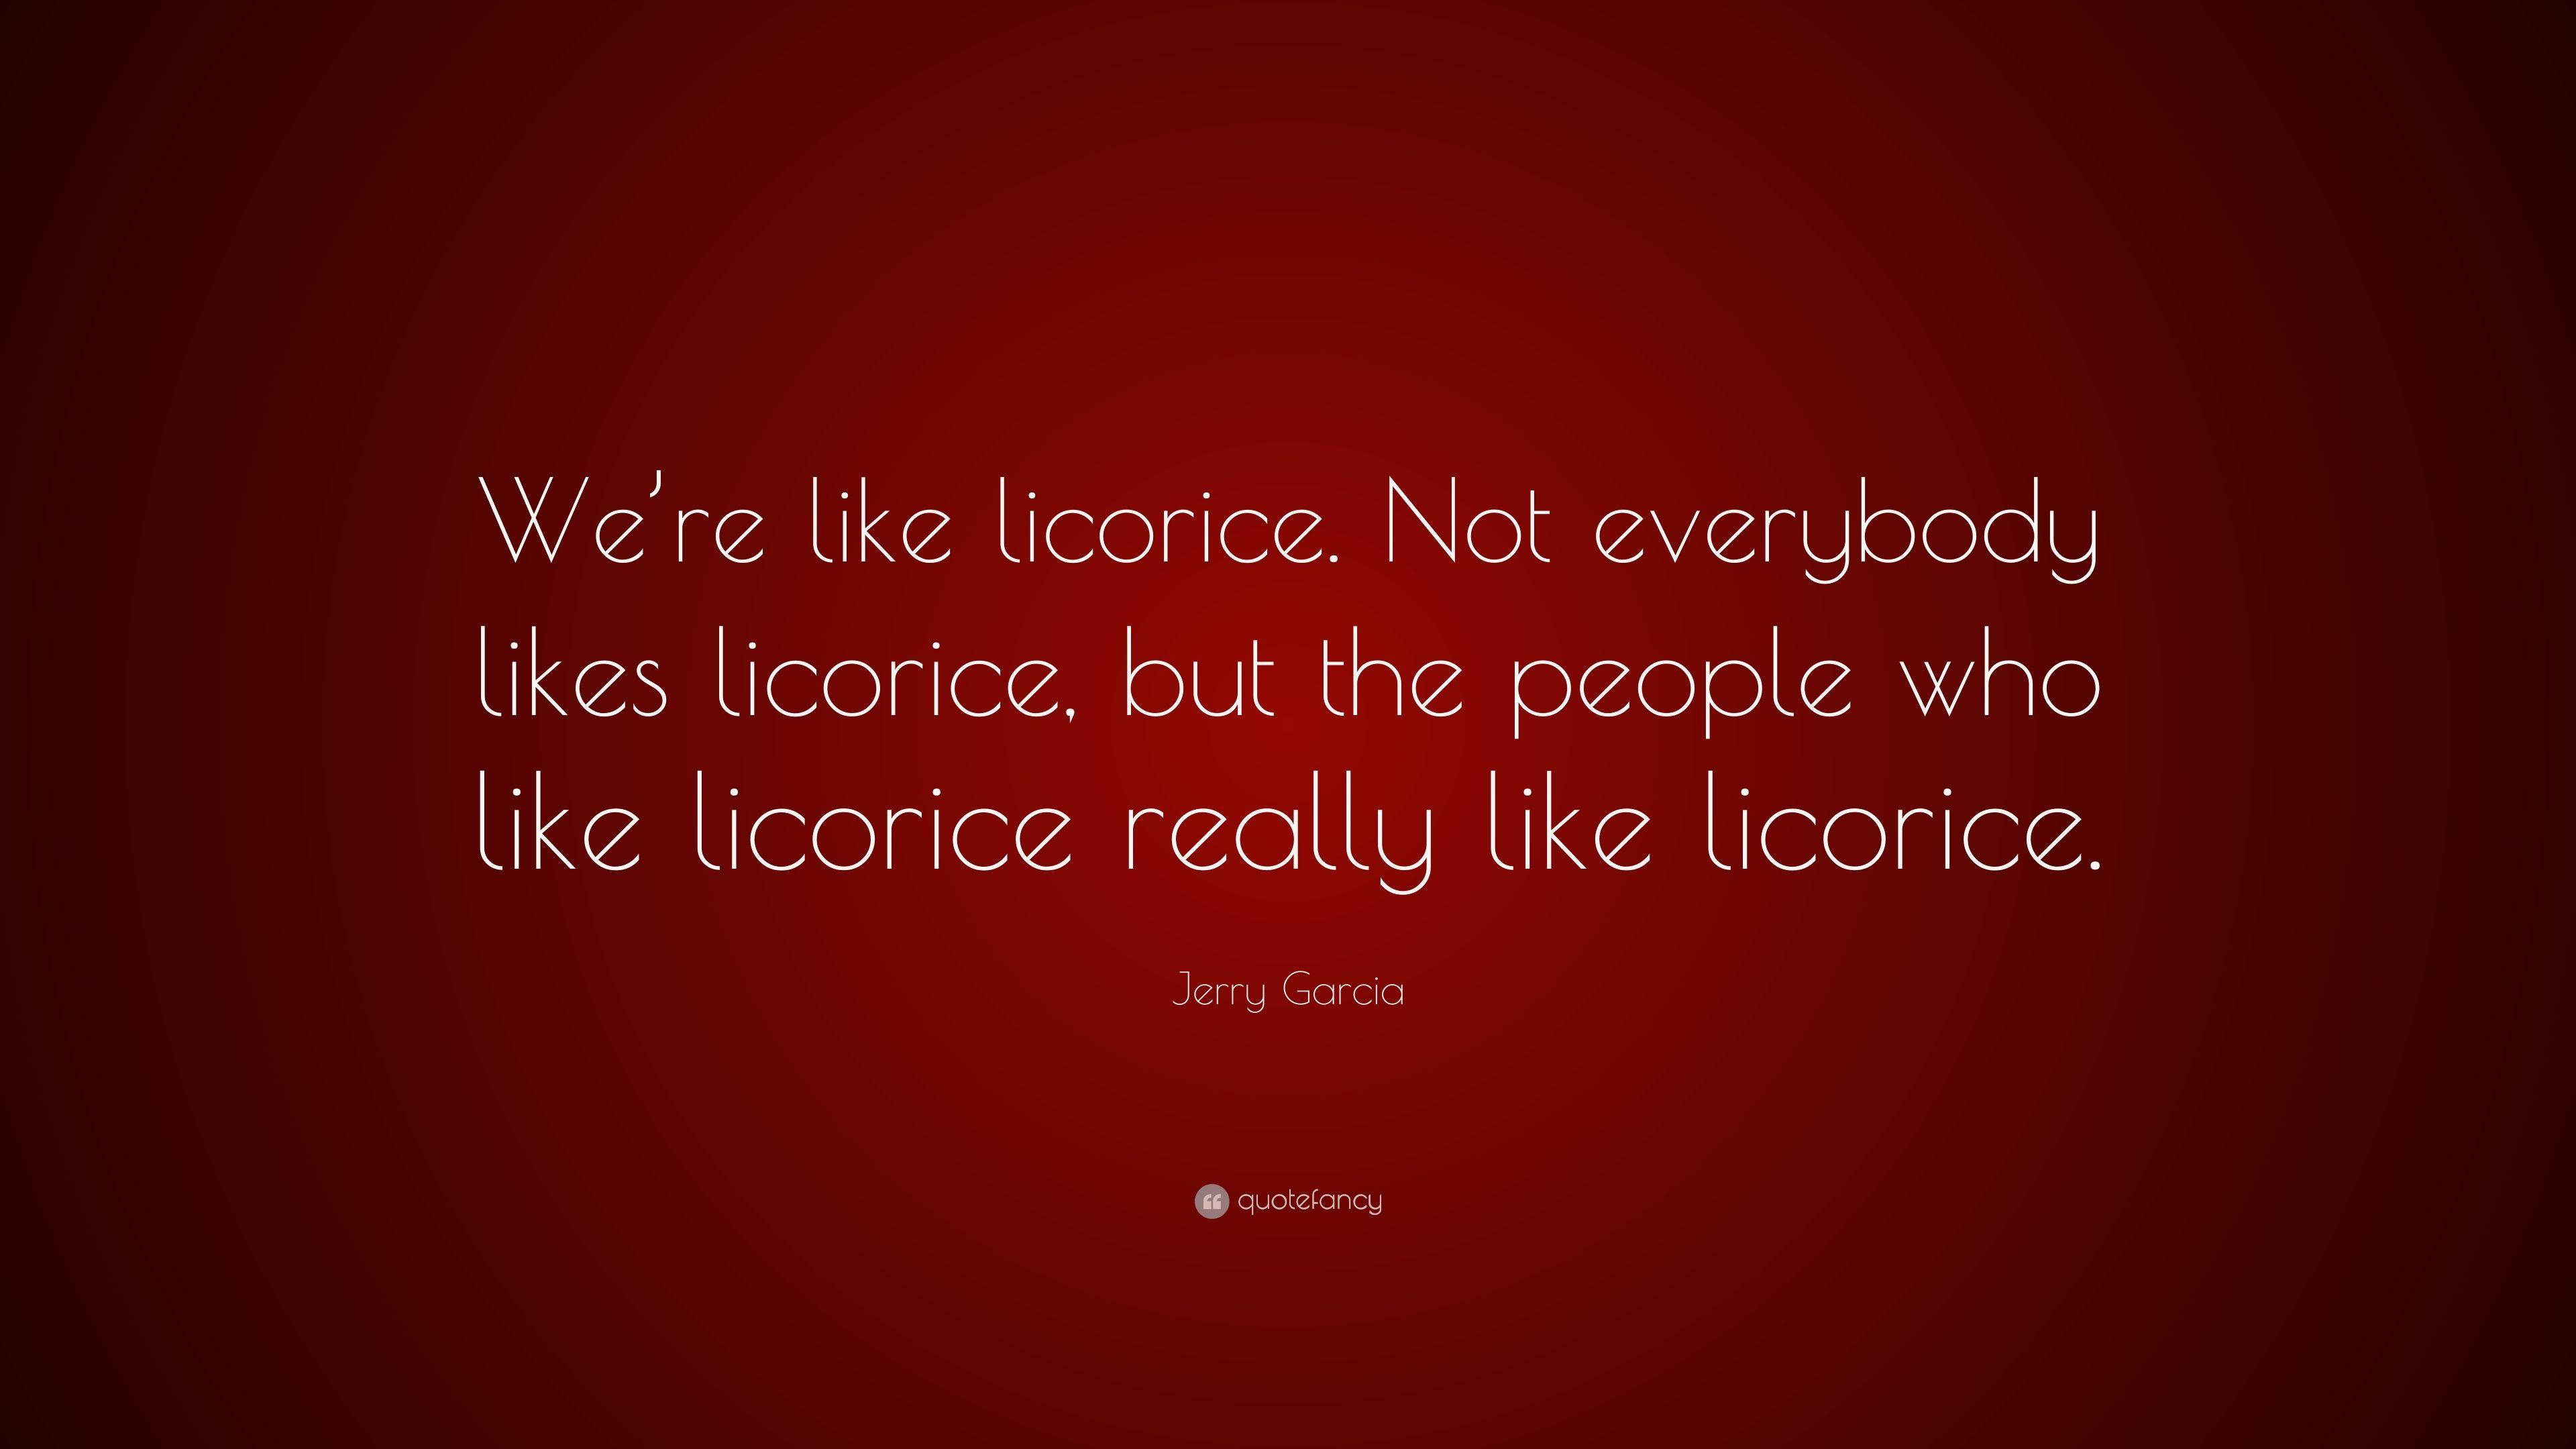 Jerry Garcia Quote: “We're like licorice. Not everybody likes